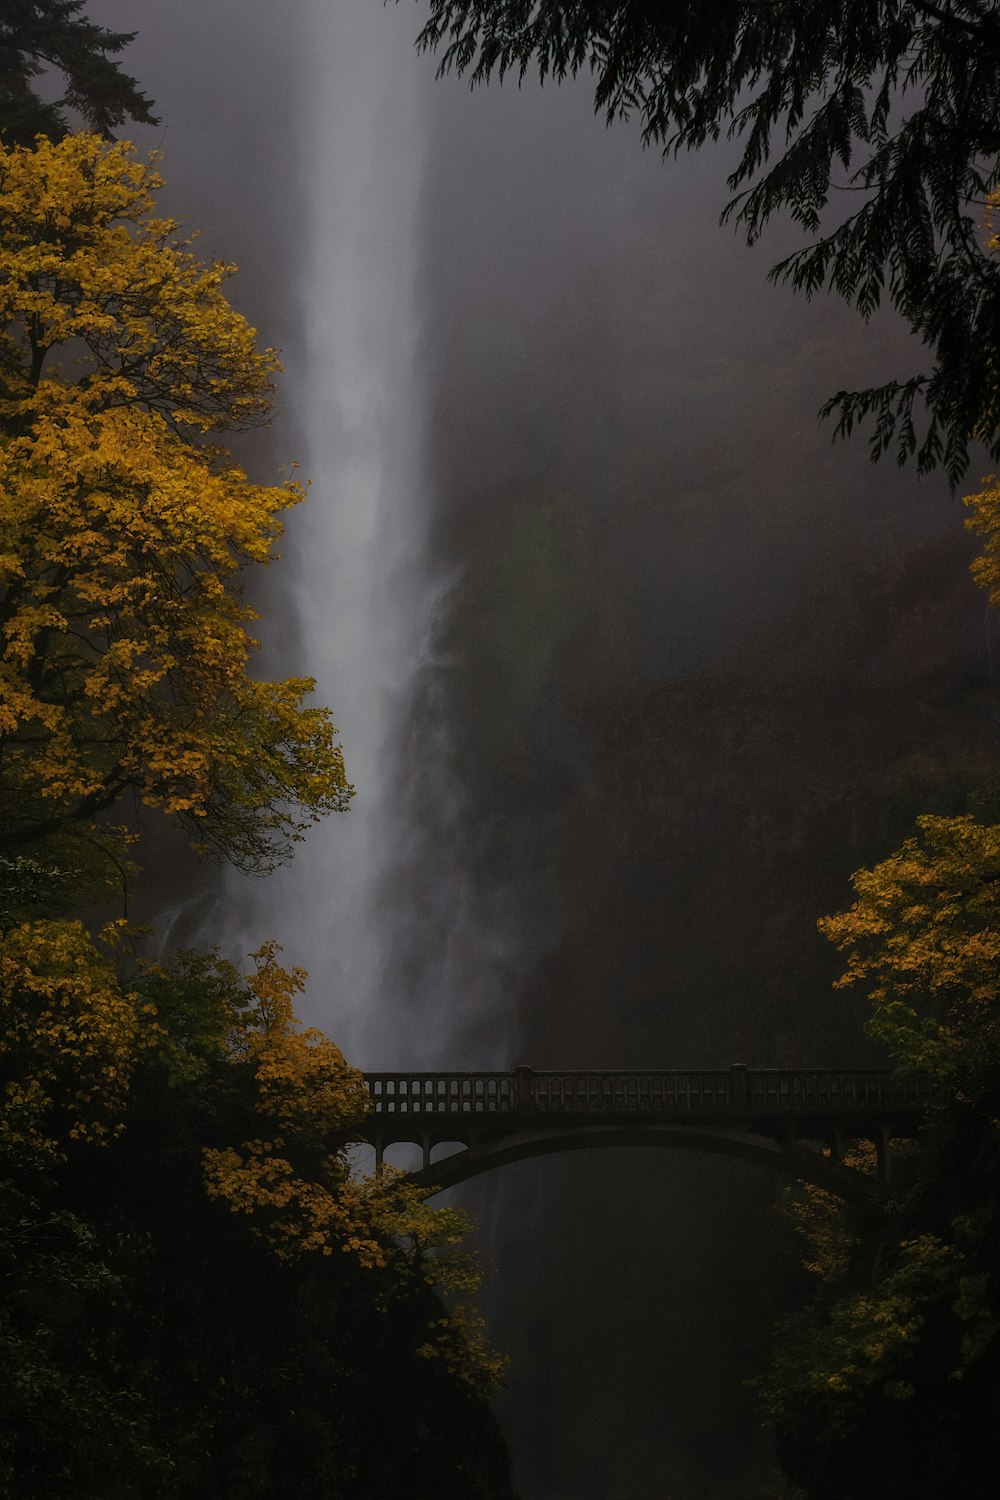 a bridge over a river with a waterfall in the background